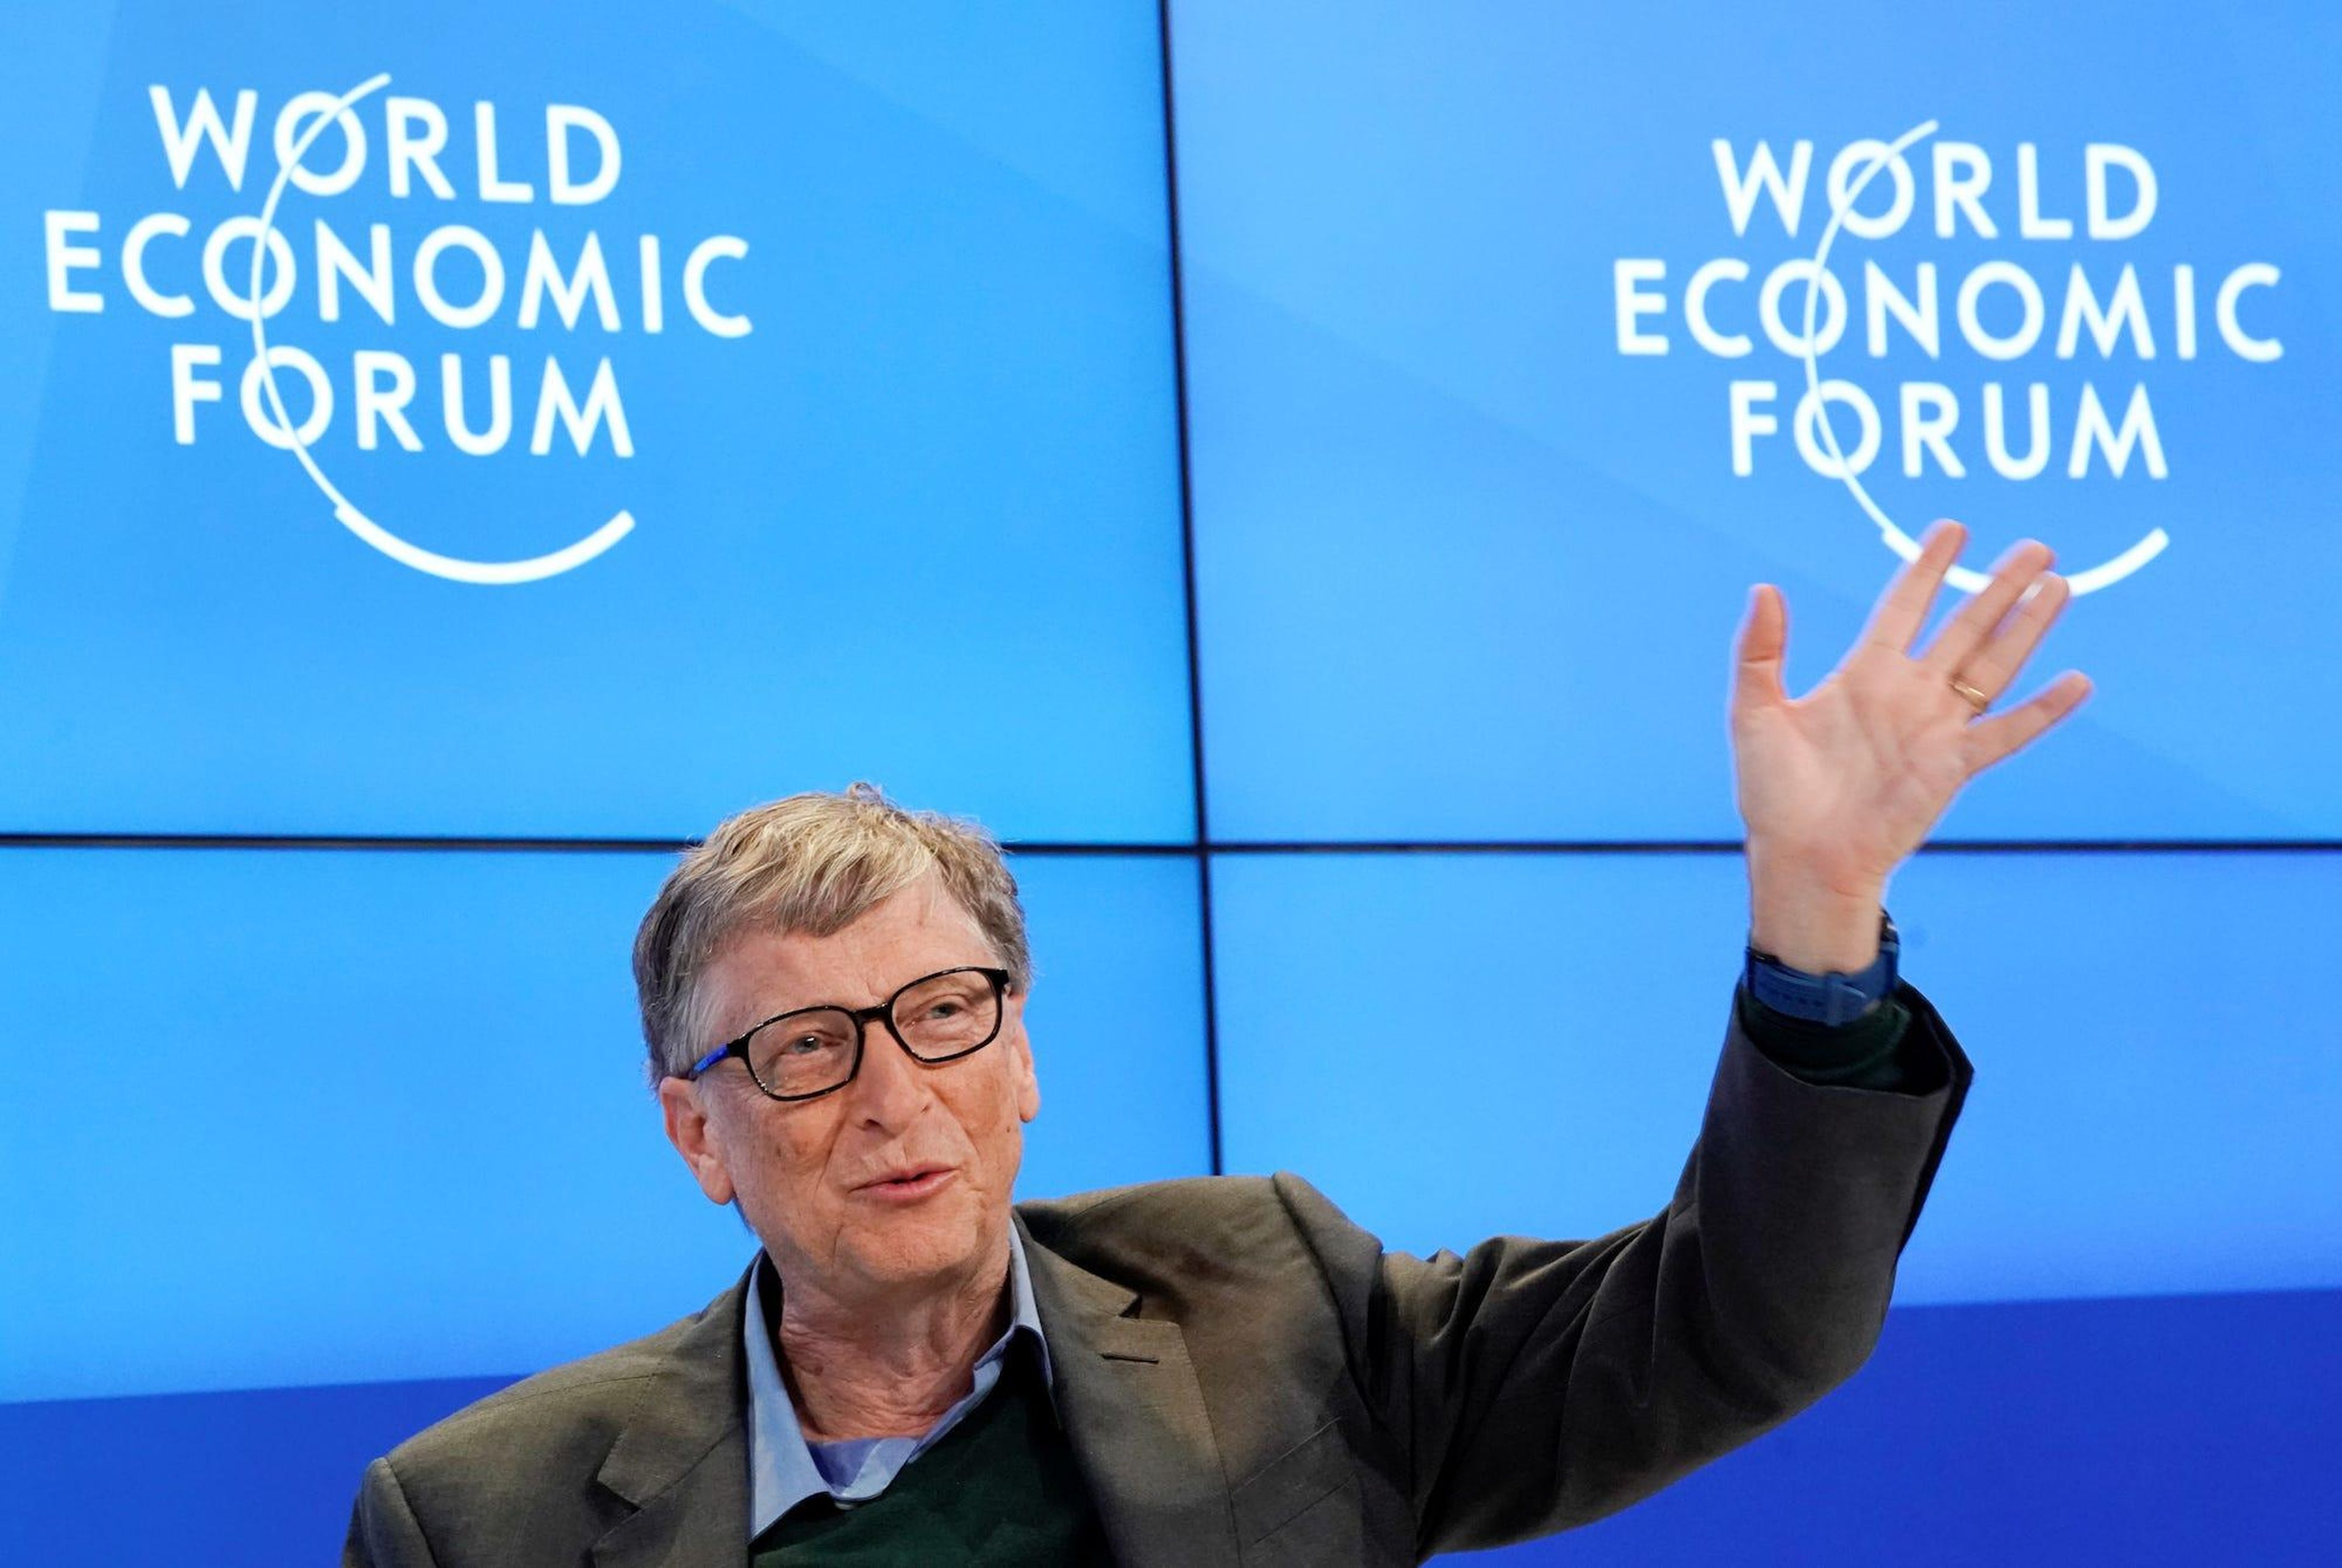 Bill Gates, Co-Chair of Bill & Melinda Gates Foundation, gestures as he speaks during the World Economic Forum (WEF) annual meeting in Davos, Switzerland January 25, 2018.